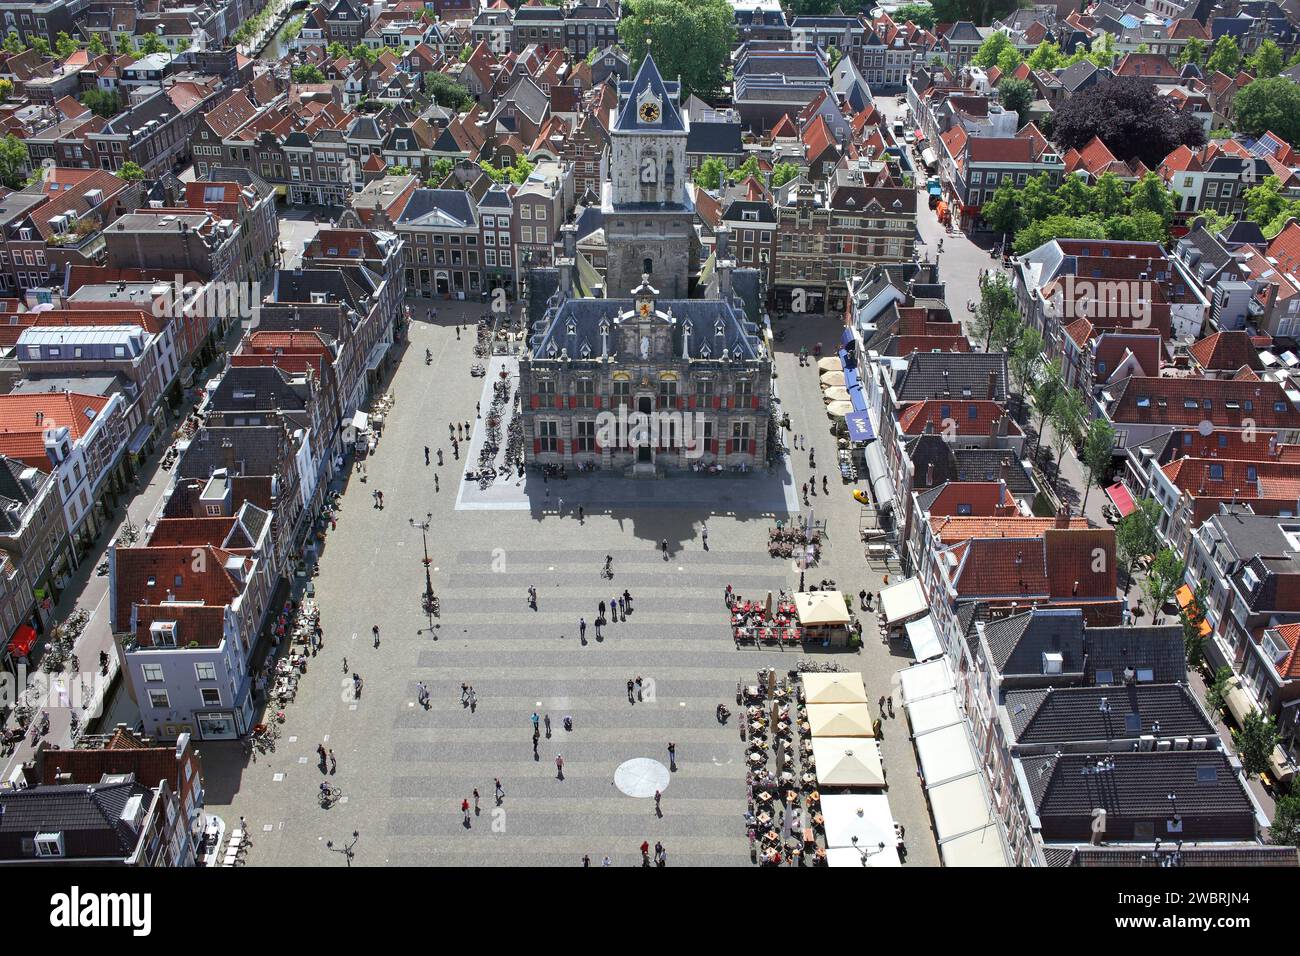 A view of the Market Square in Delft with the City Hall in the centre. As seen from the tower of the New Church. Stock Photo